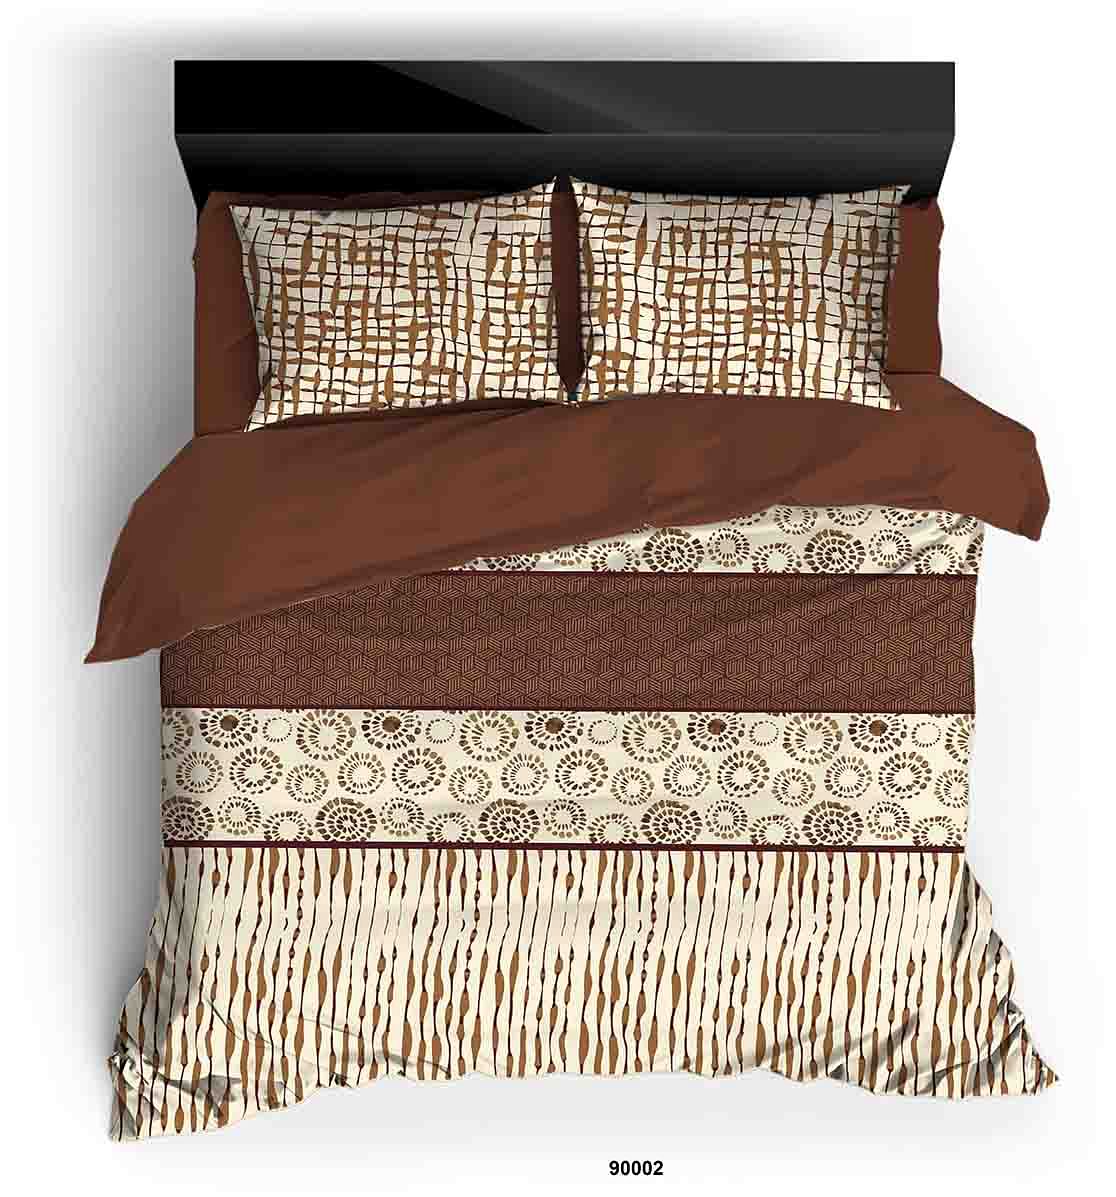 DOUBLE BEDSHEET TS 90002,BROWN,KING SIZE